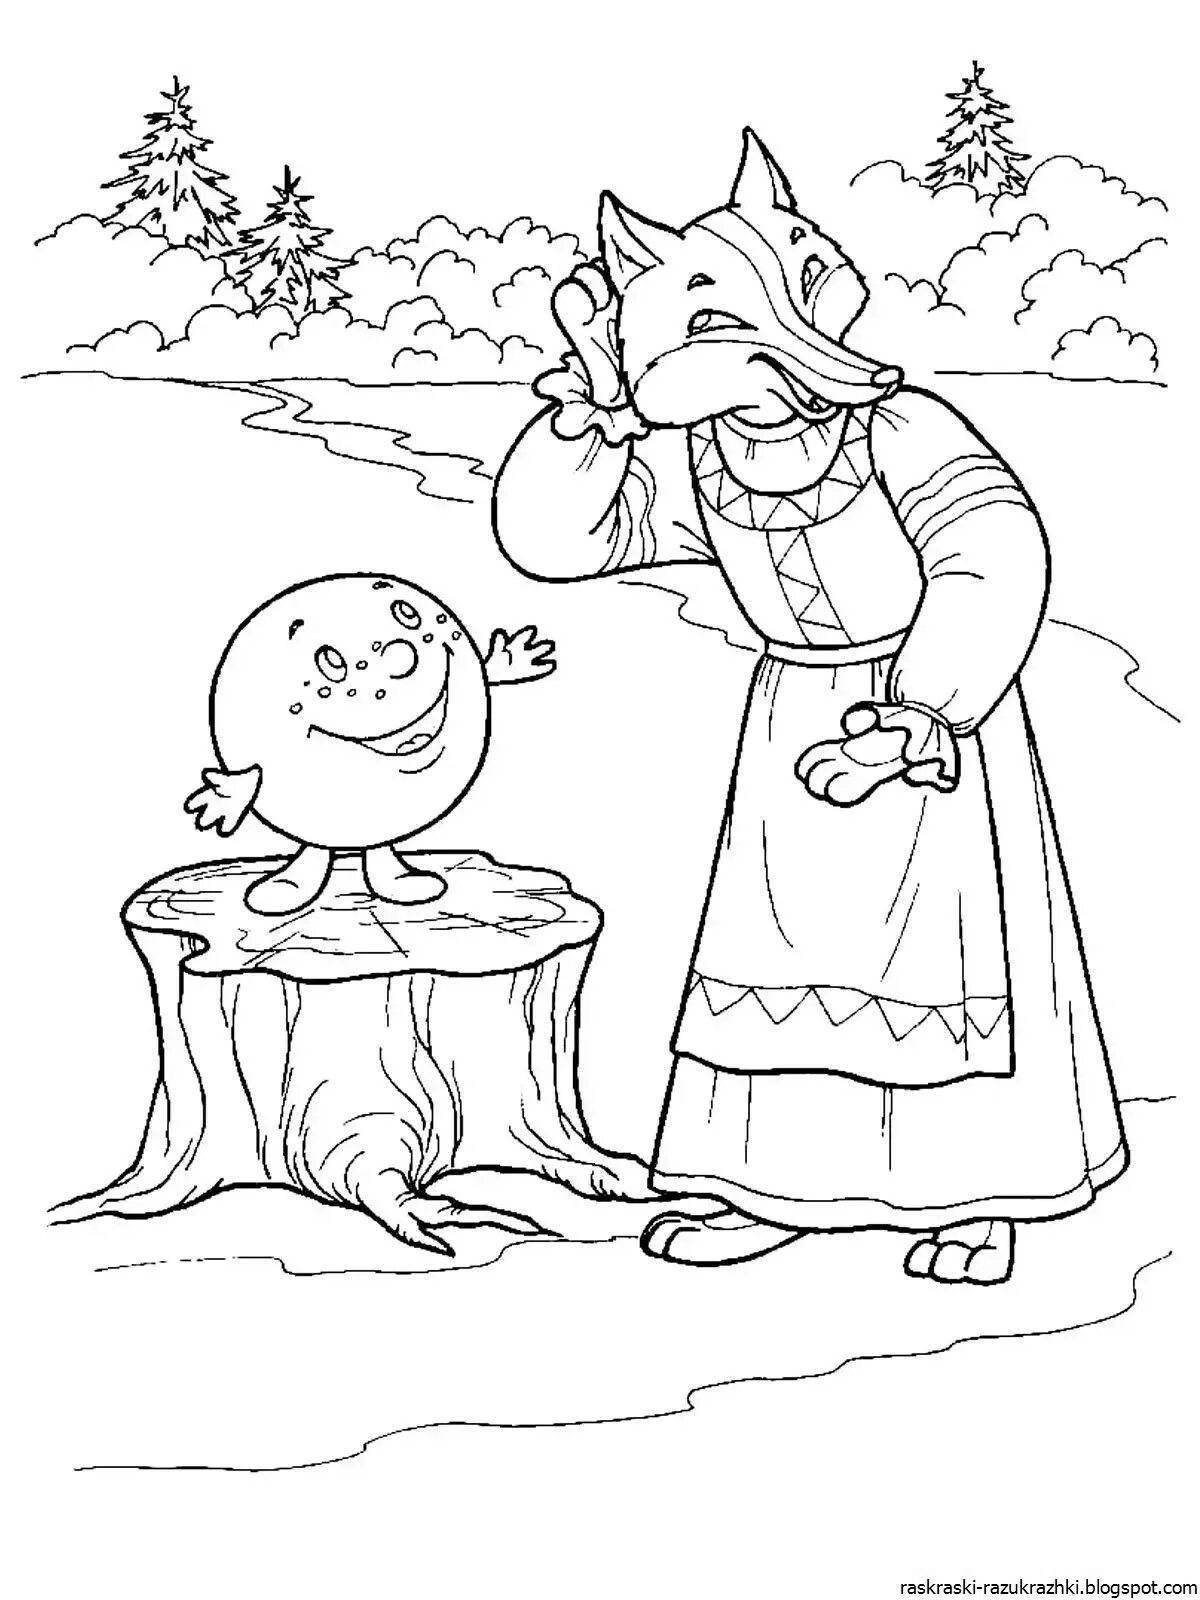 Fun coloring for children 3-4 years old Russian folk tales